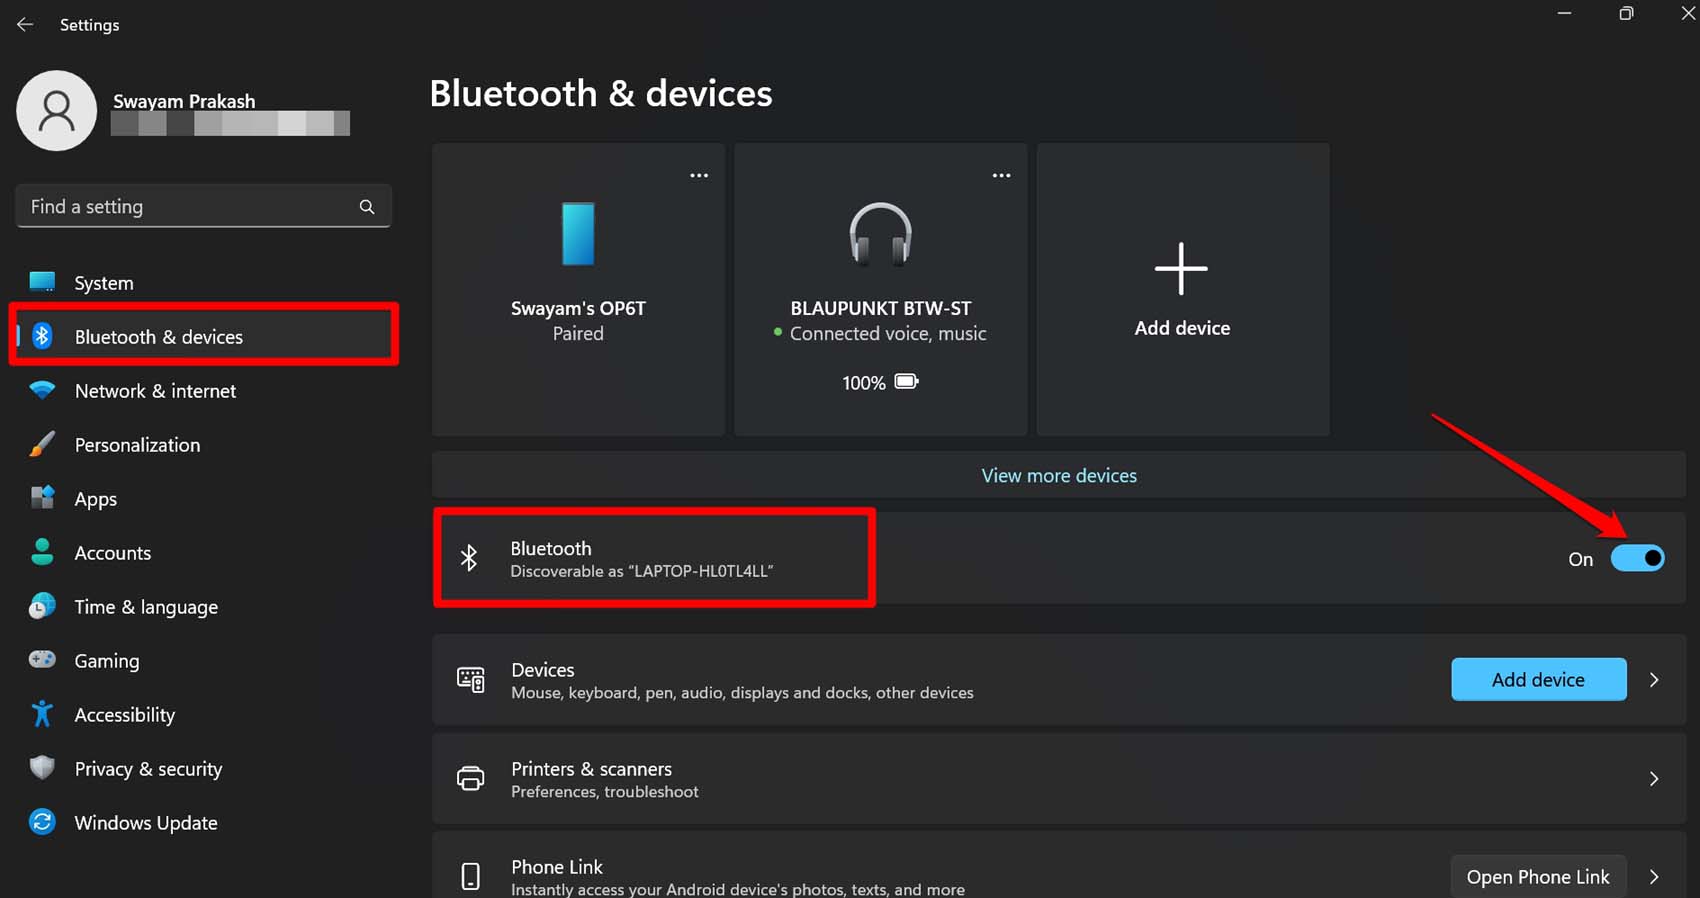 disable-and-re-enable-Bluetooth-on-Windows-OS